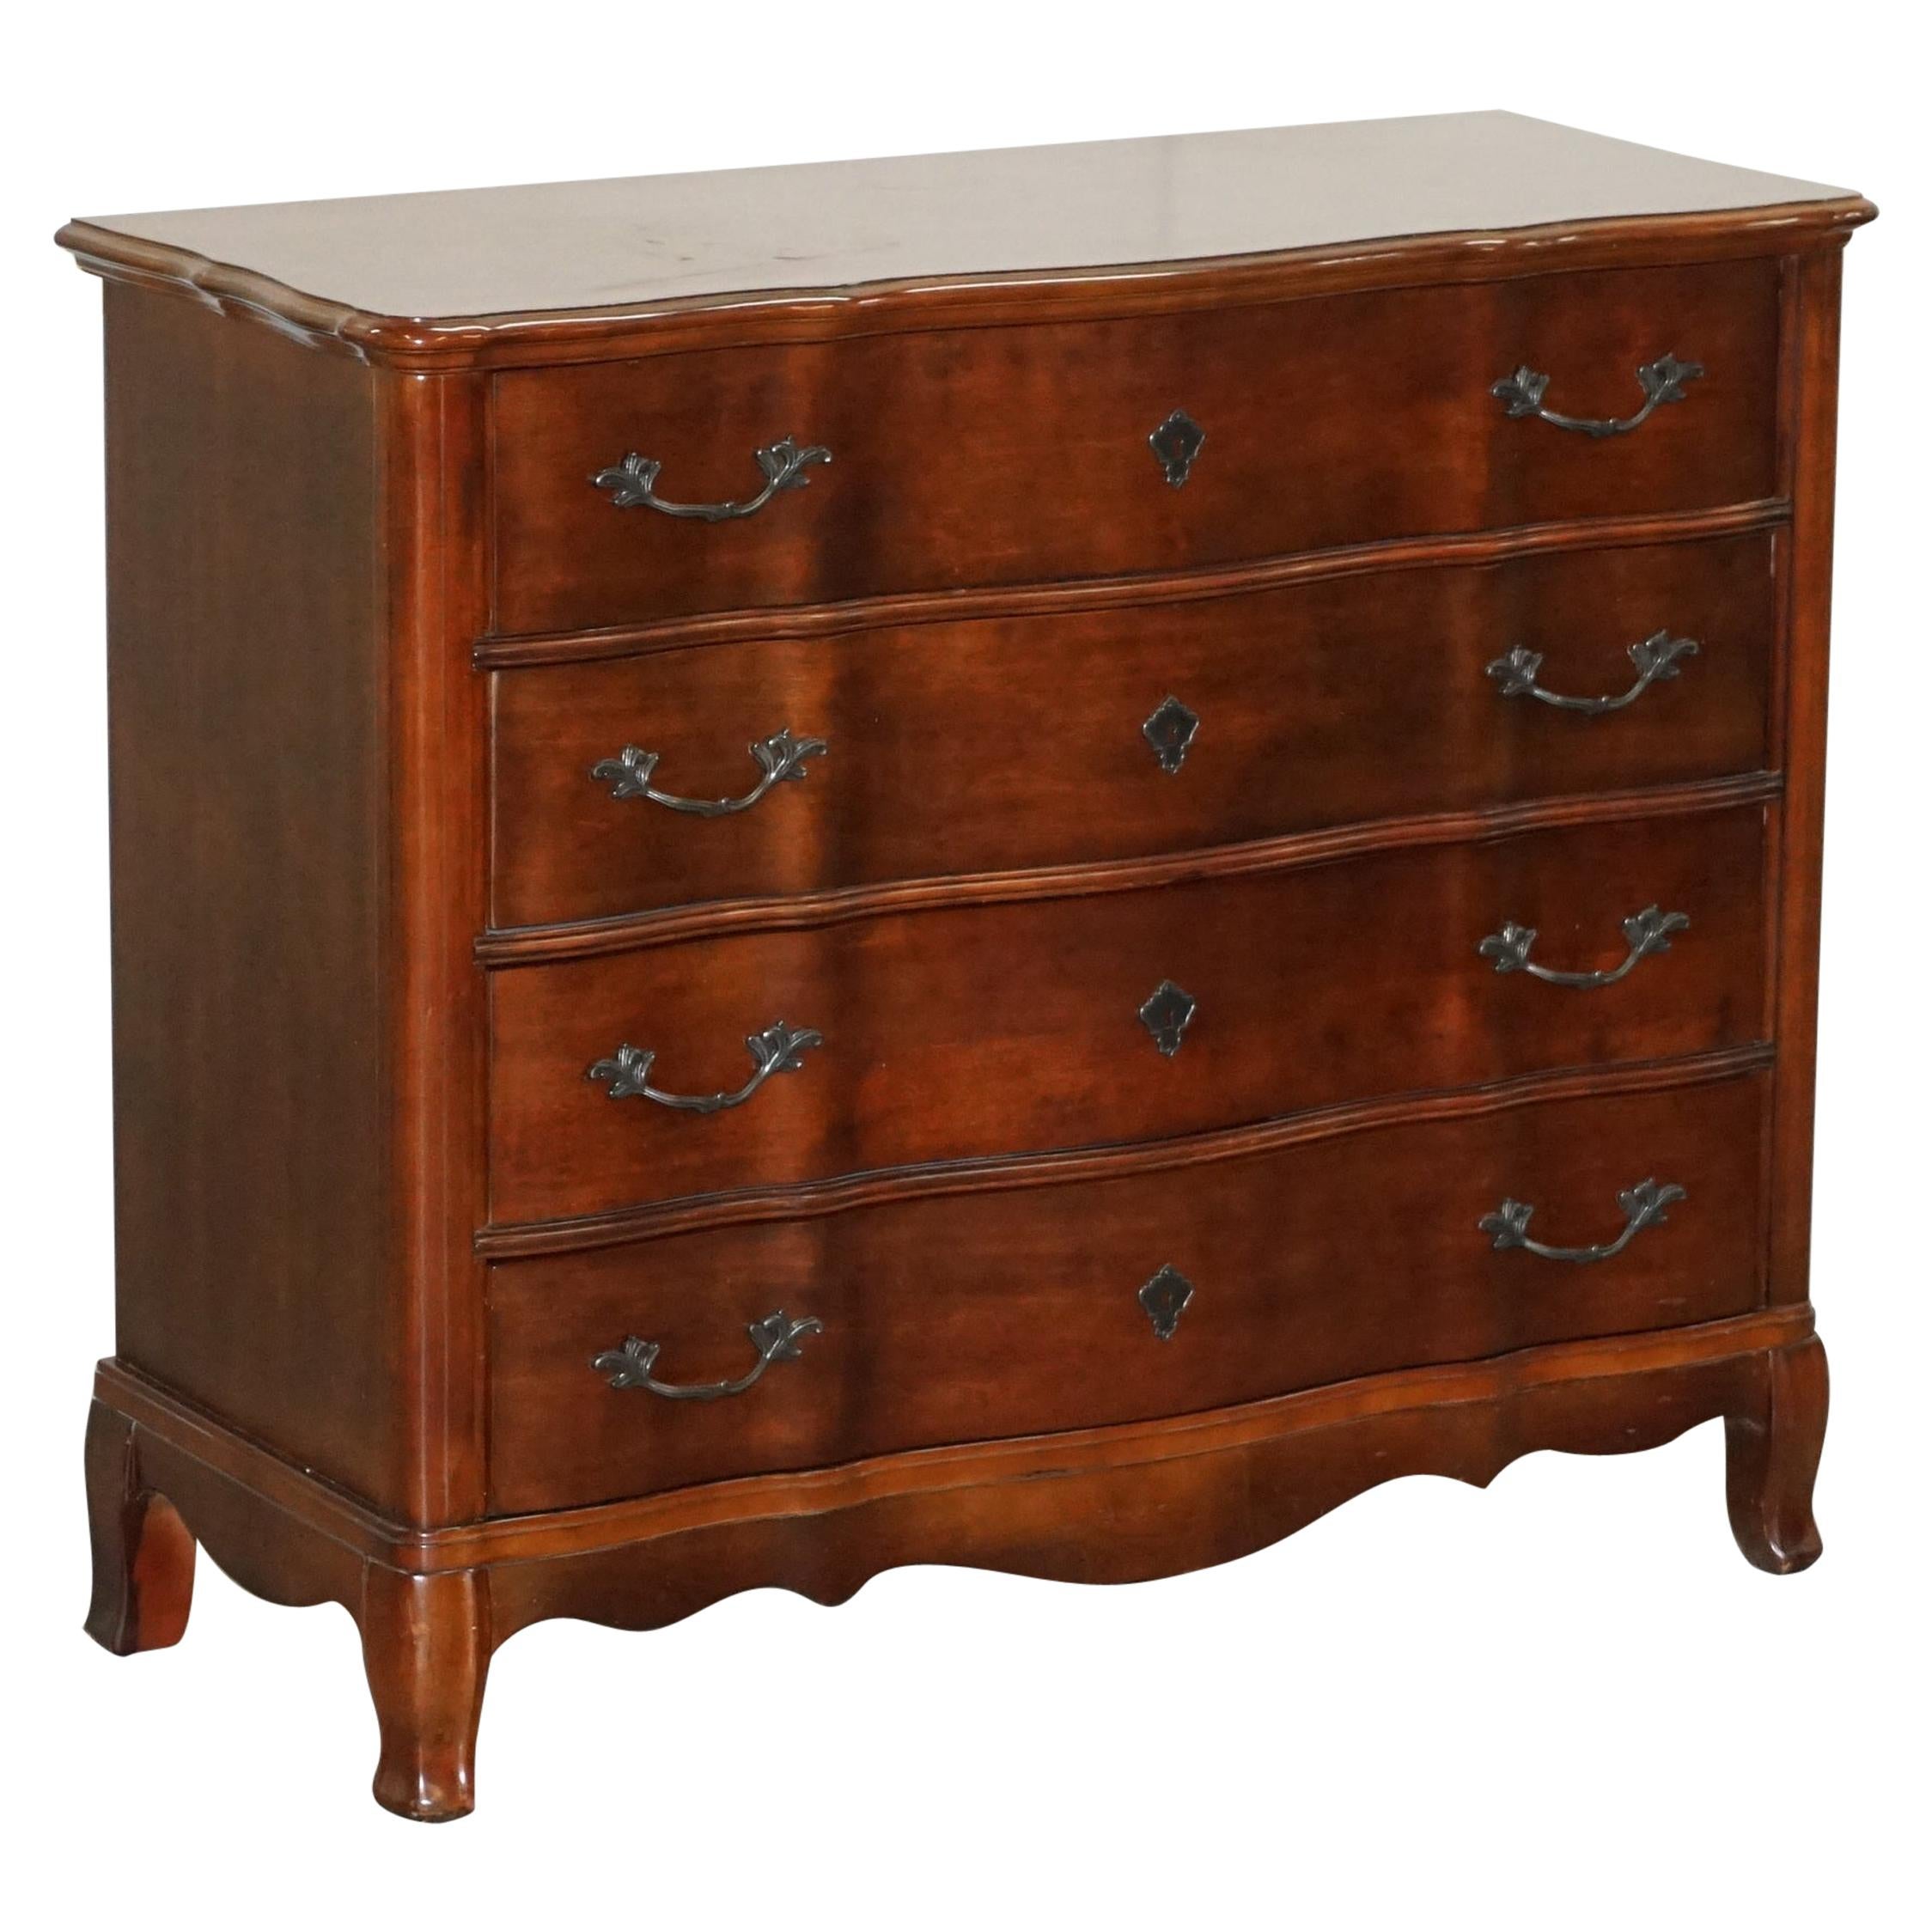 Stunning Serpentine Fronted Ralph Lauren American Hardwood Chest of Drawers For Sale